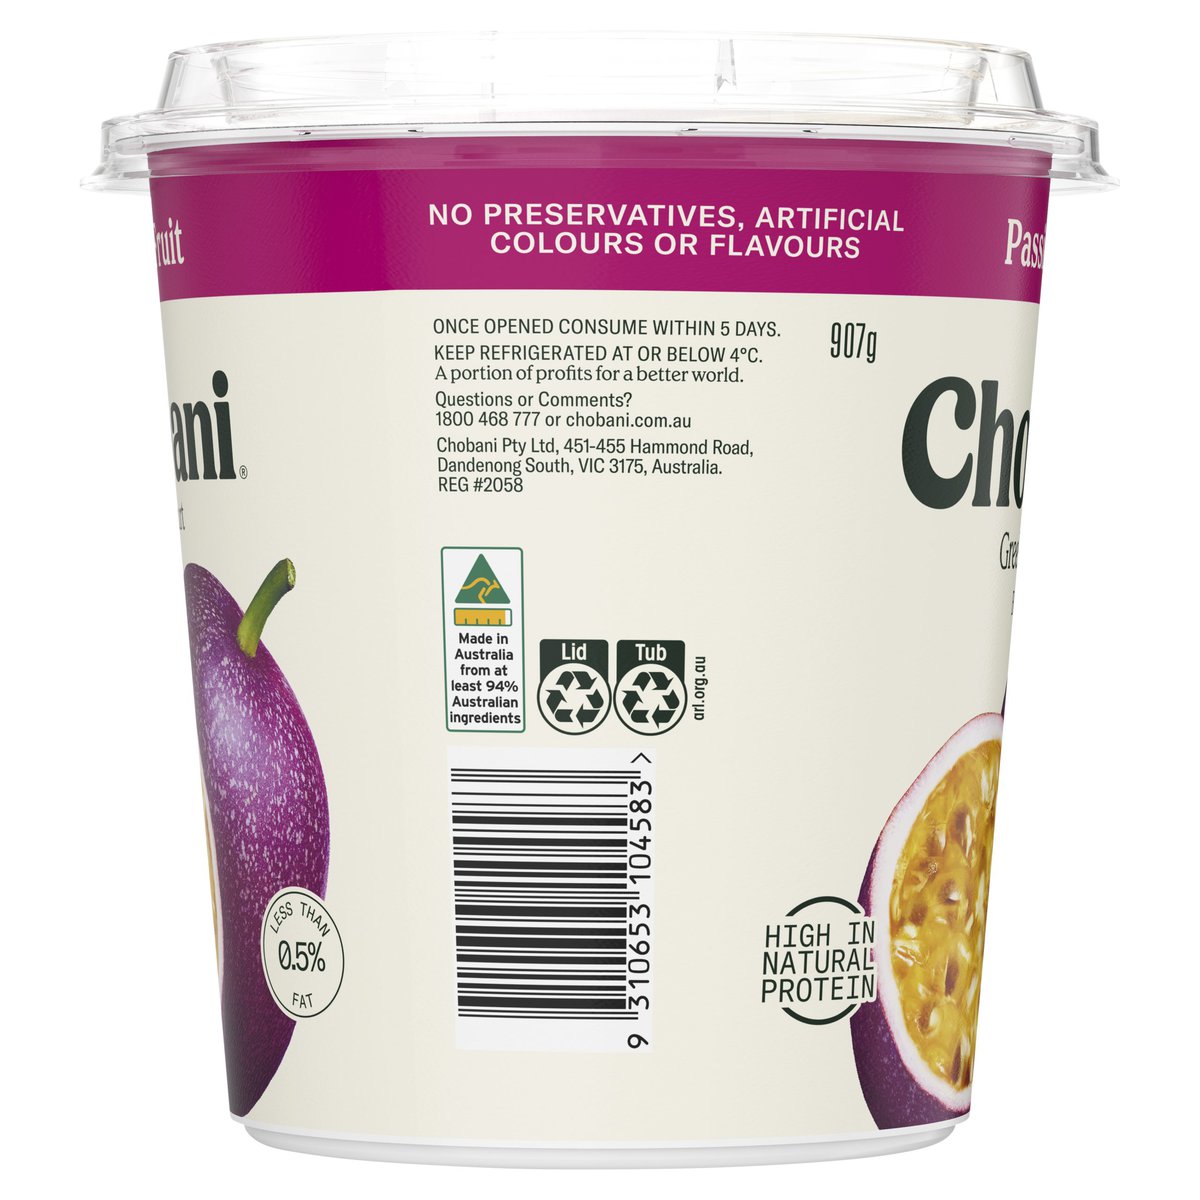 Chobani passionfruit product photography 3D render